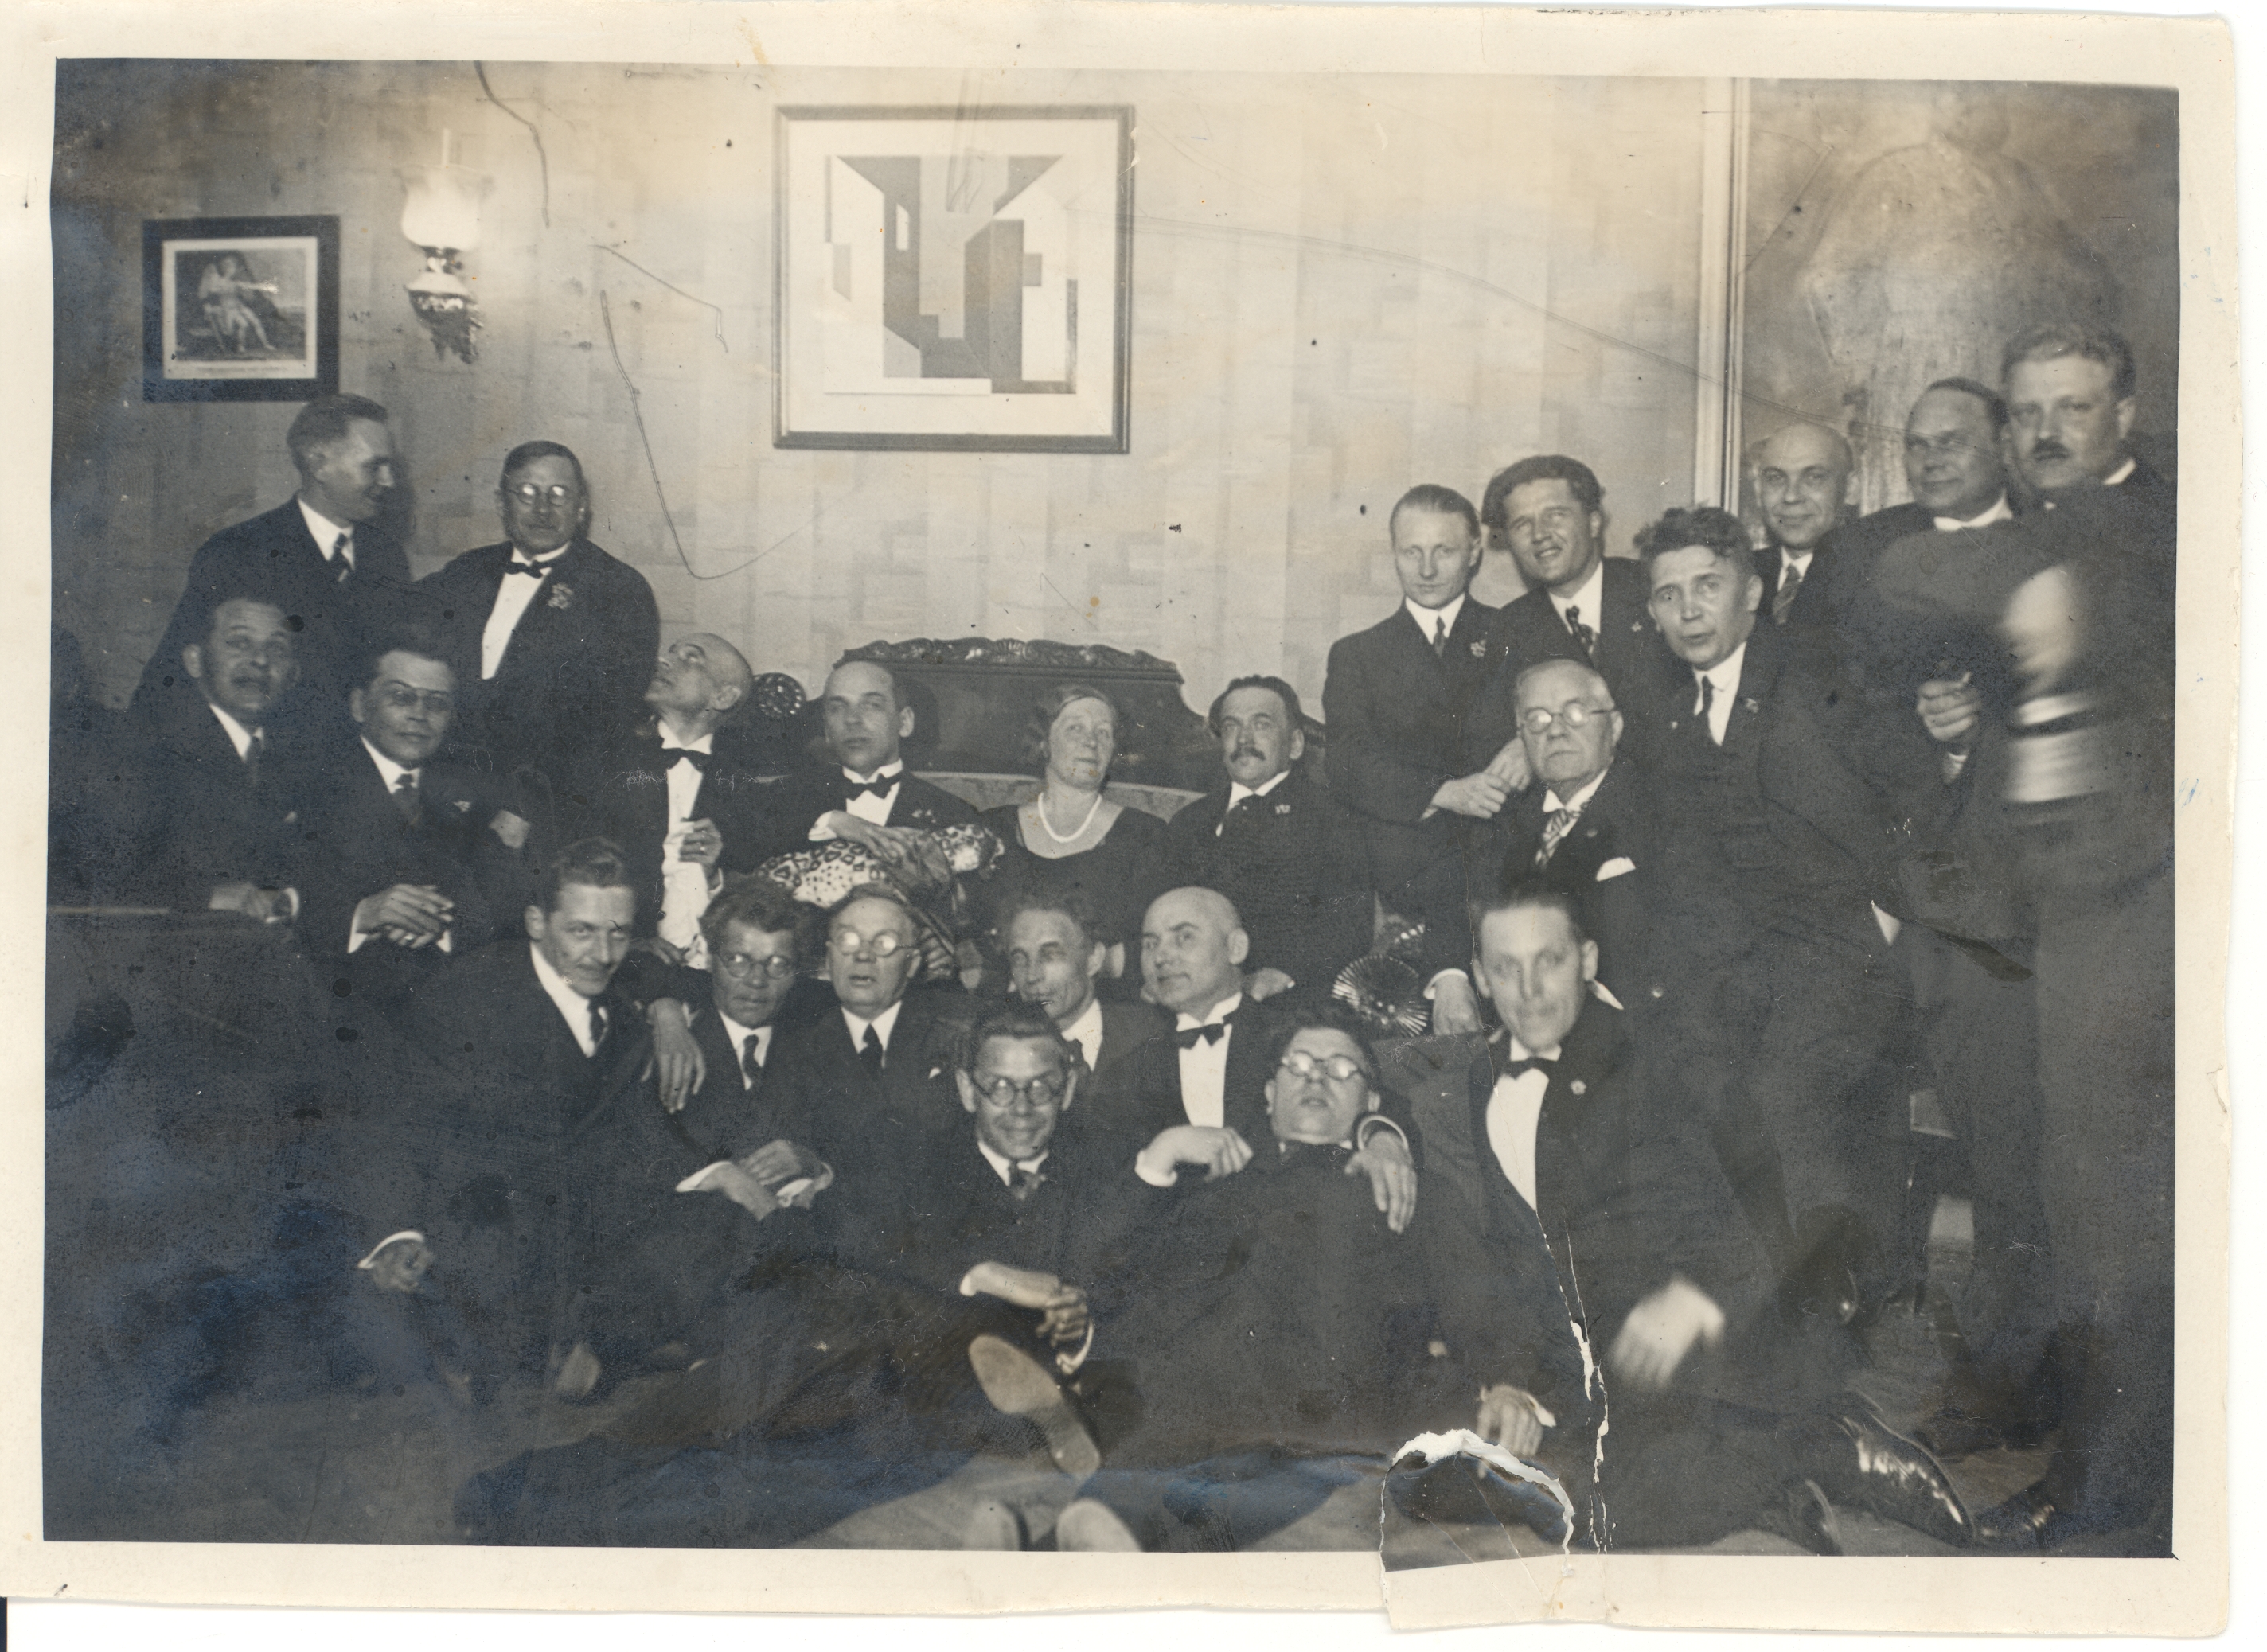 At the home of journalists in Kosel in spring 1933